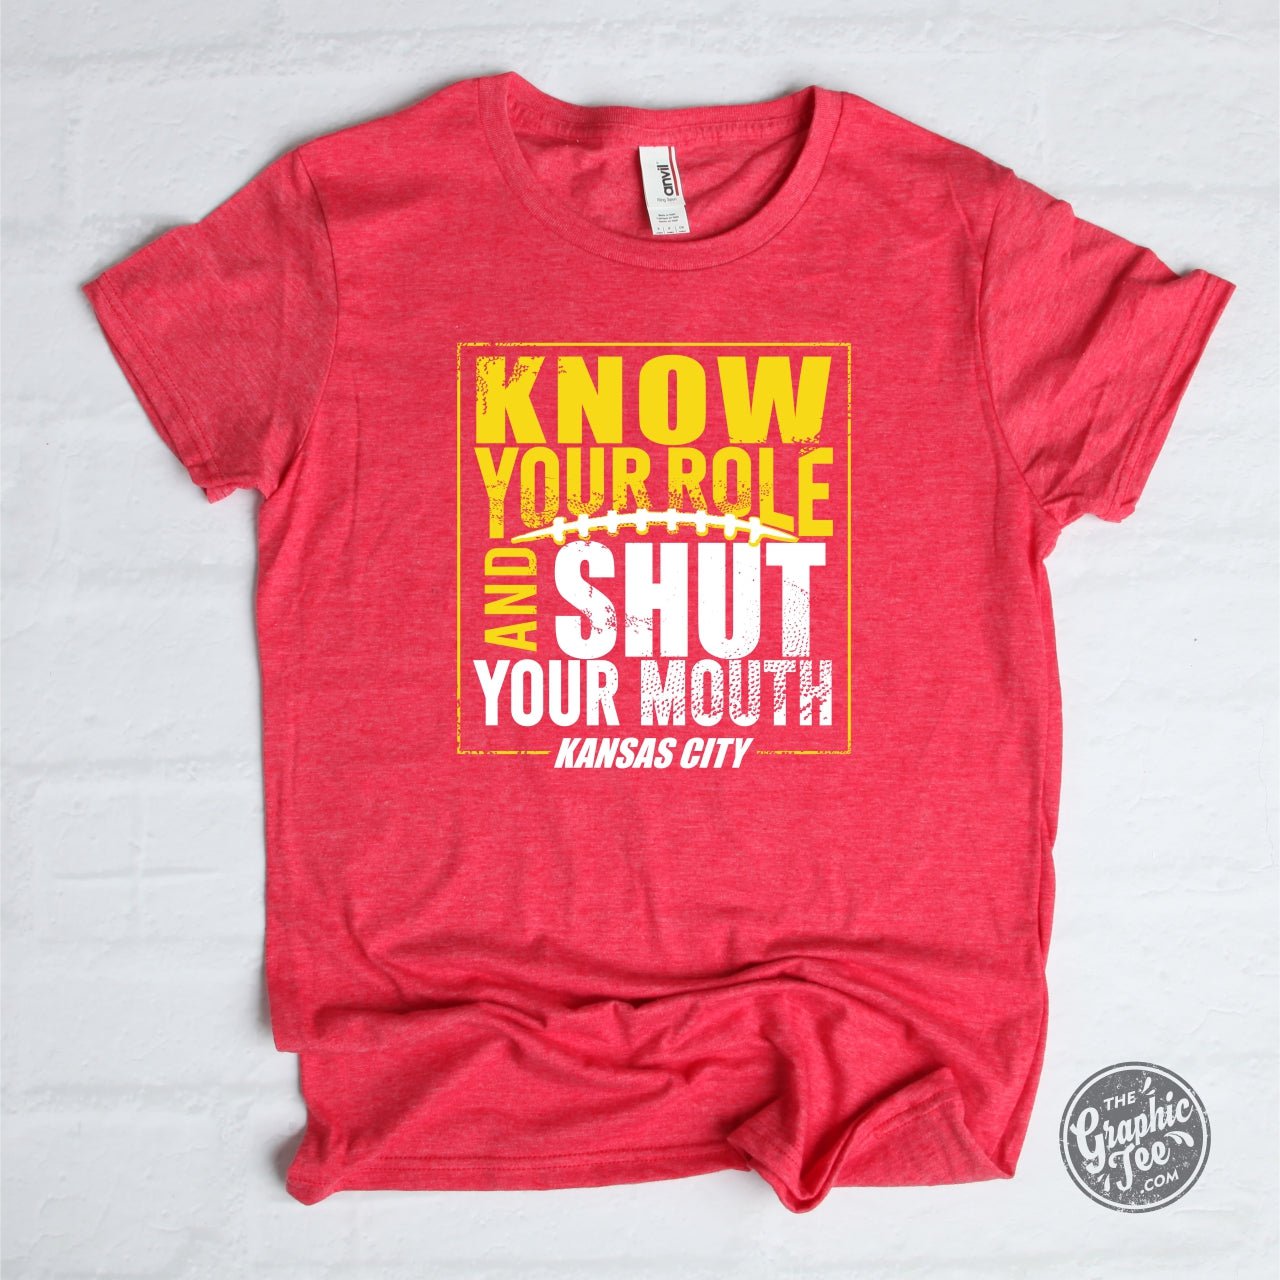 Know Your Role And Shut Your Mouth Red Short Sleeve Tee - The Graphic Tee